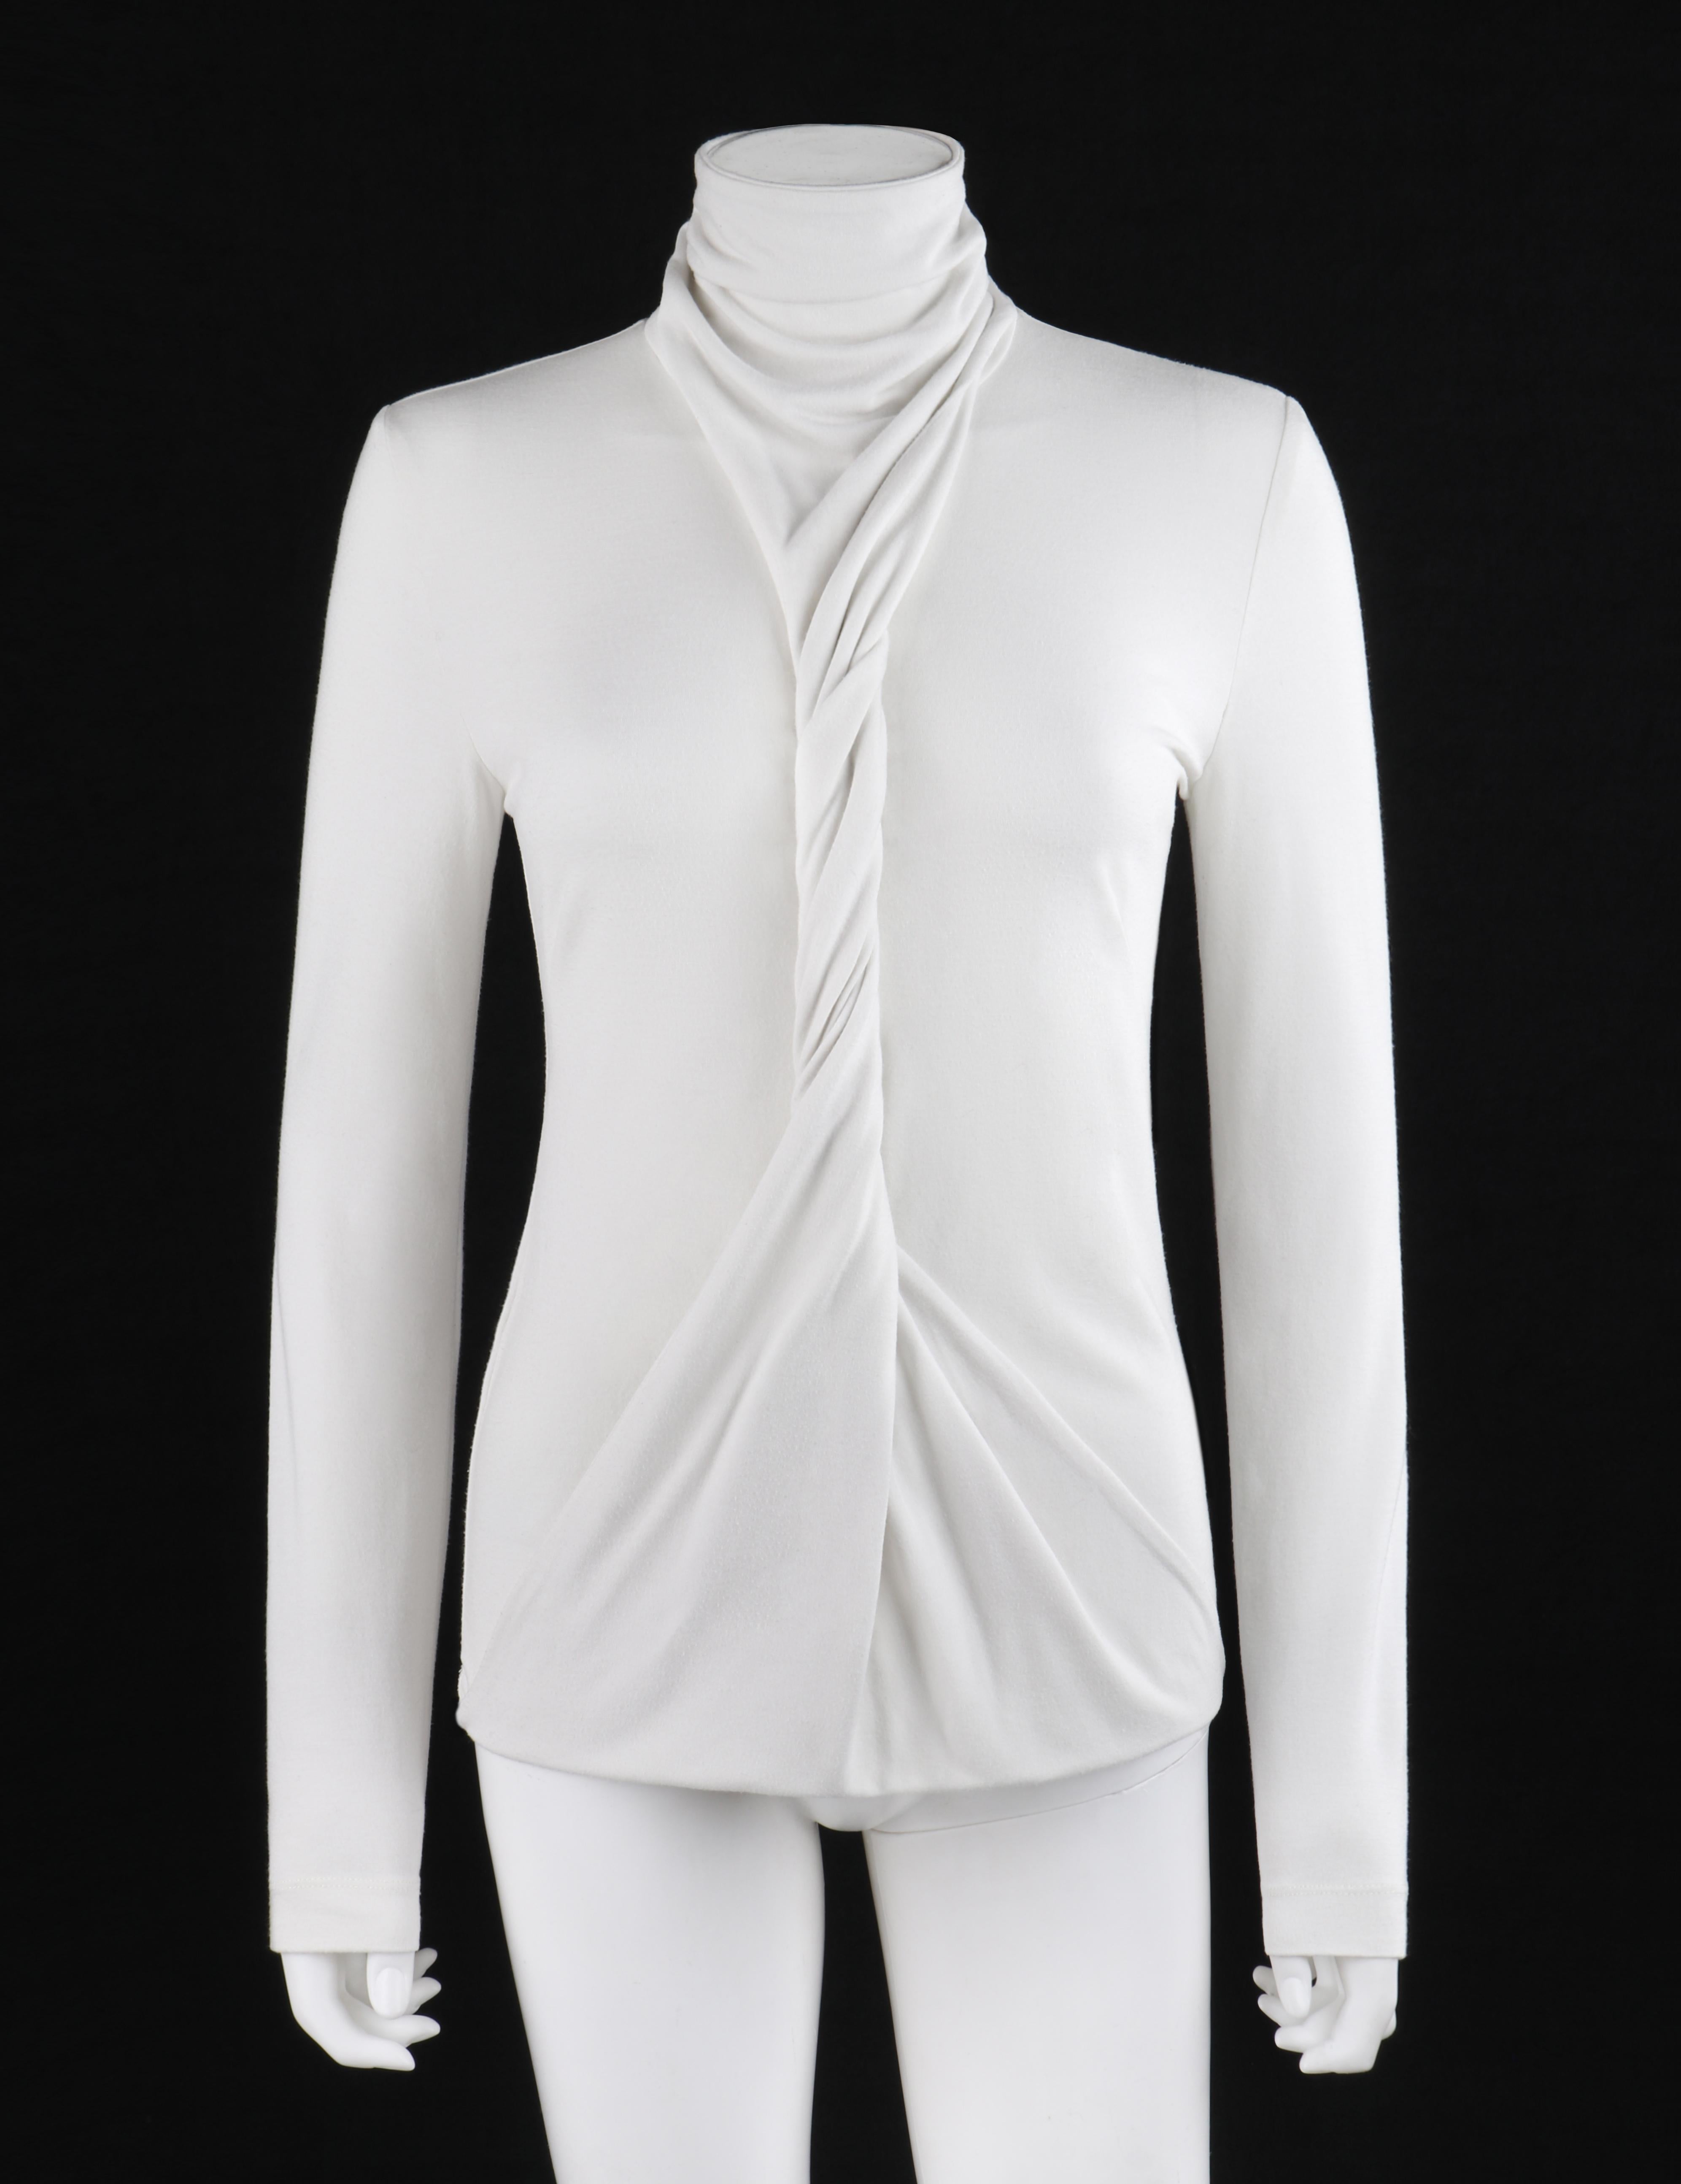 ALEXANDER McQUEEN S/S 2000 “Eye” White Convertible Twisted Front High Neck Top
 
Brand / Manufacturer: Alexander McQueen
Collection: S/S 2000 “Eye” 
Designer: Alexander McQueen
Style: Long sleeve top
Color(s): White
Lined: No
Marked Fabric Content: